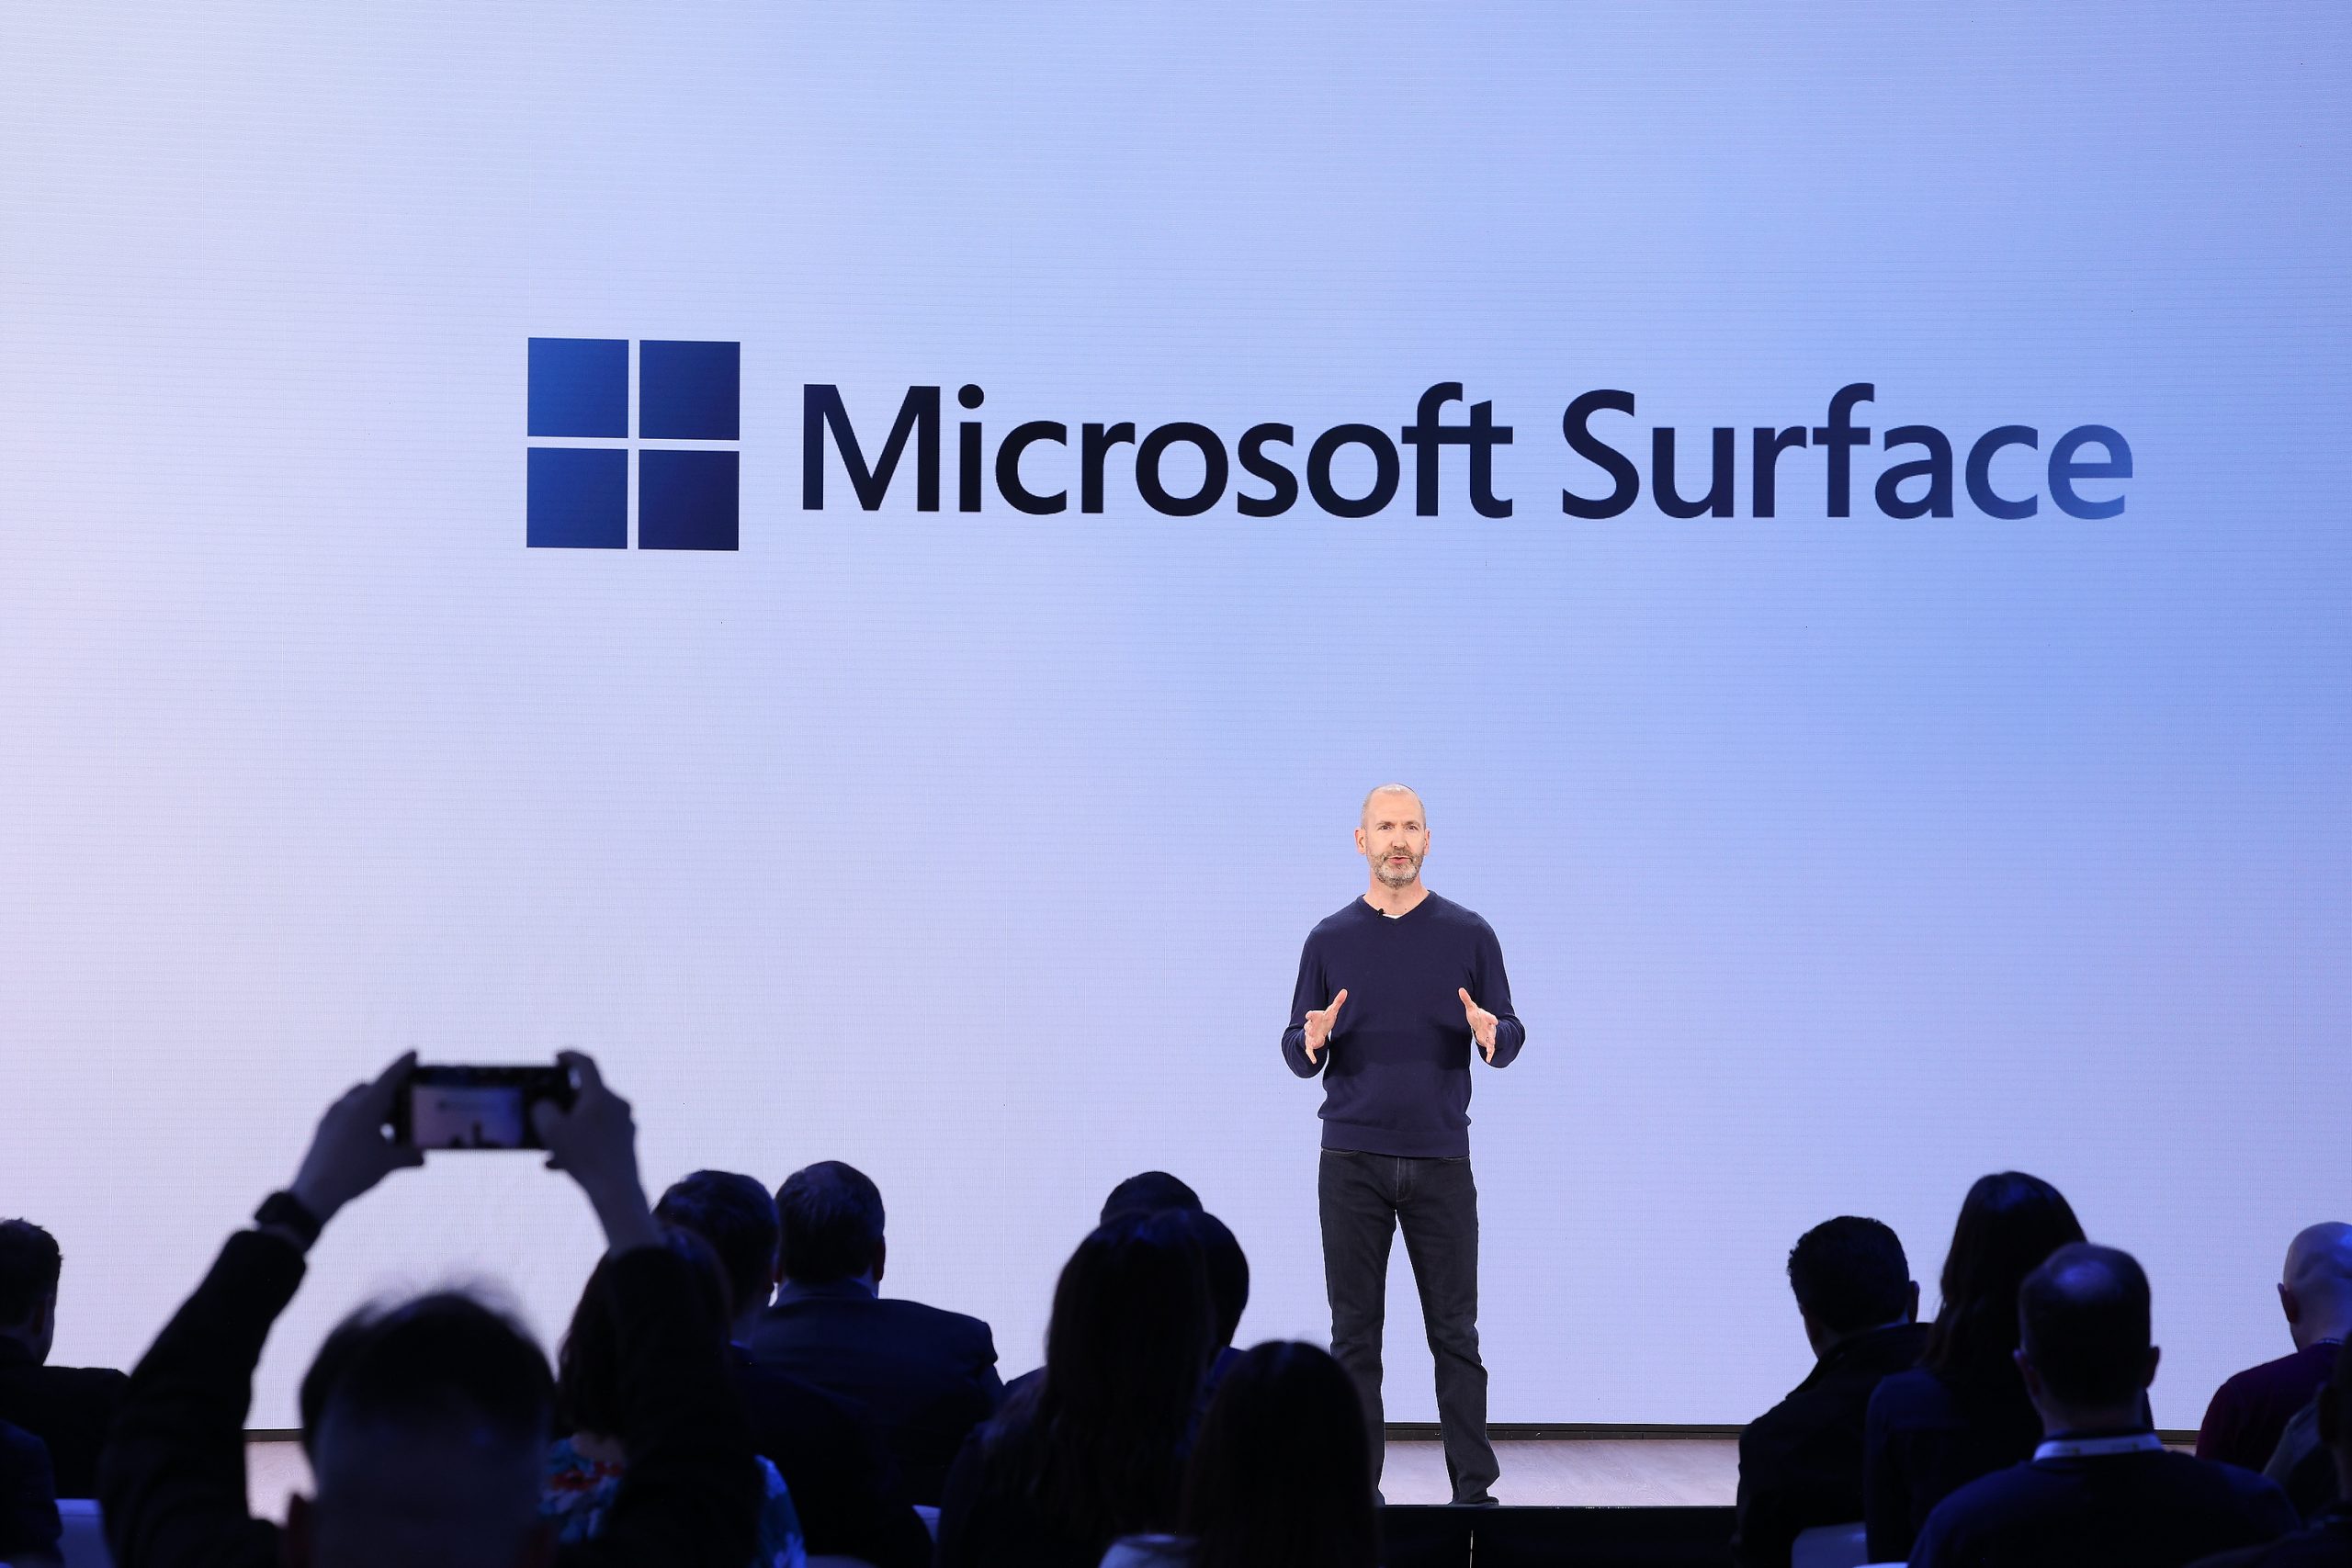 A man standing on stage in front of an audience, with the Microsoft Surface logo on the screen behind him